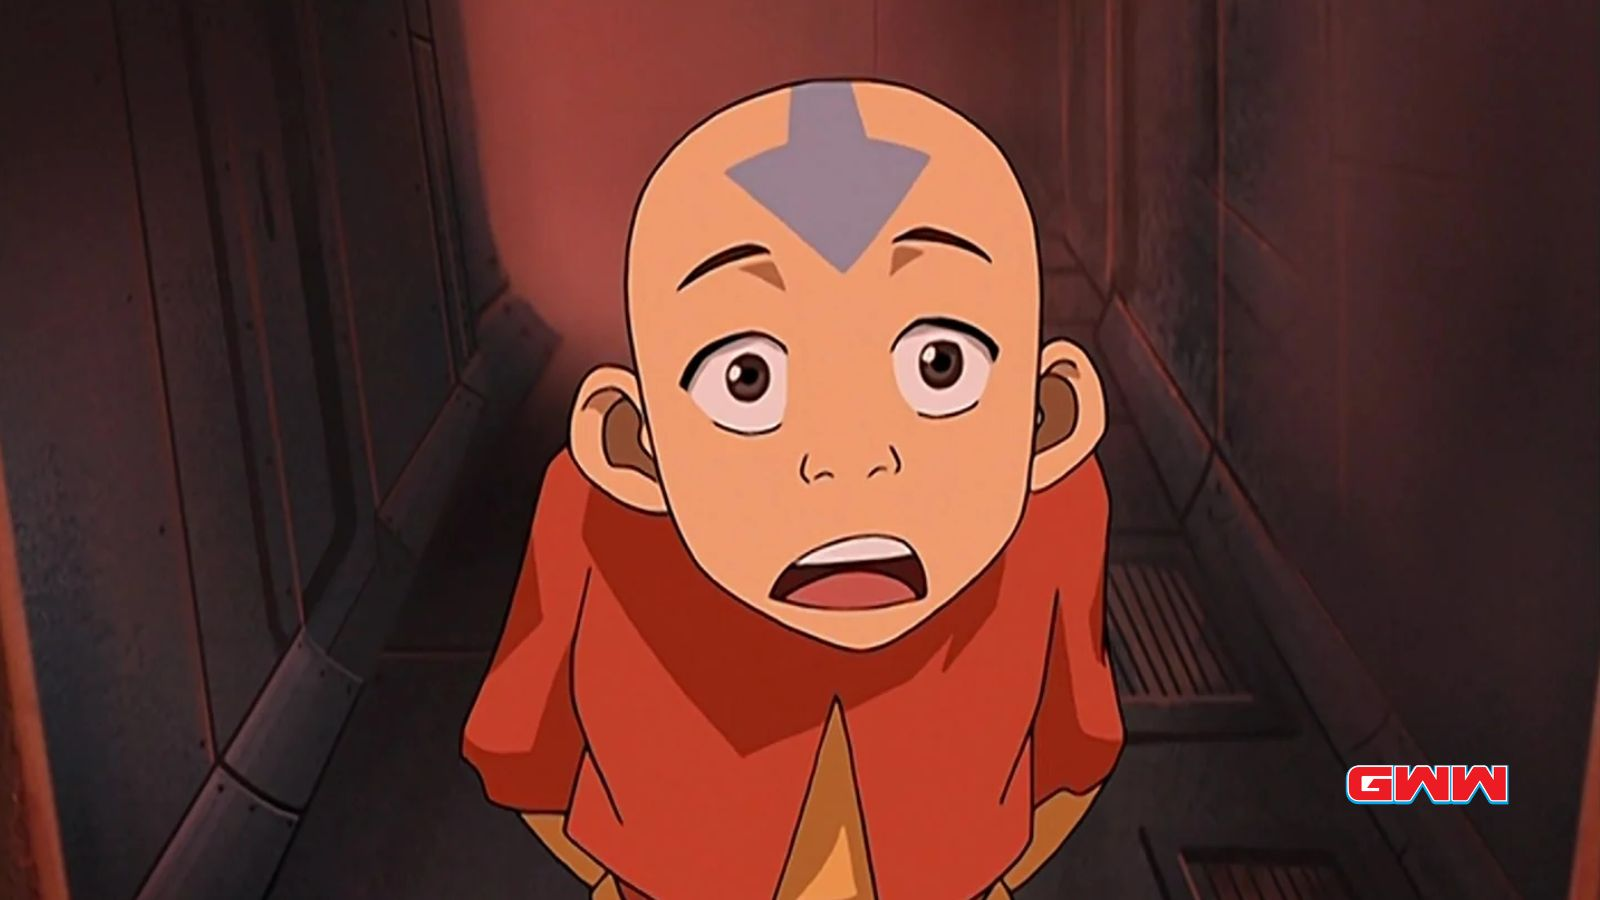 Aang looking confused, is Avatar an anime